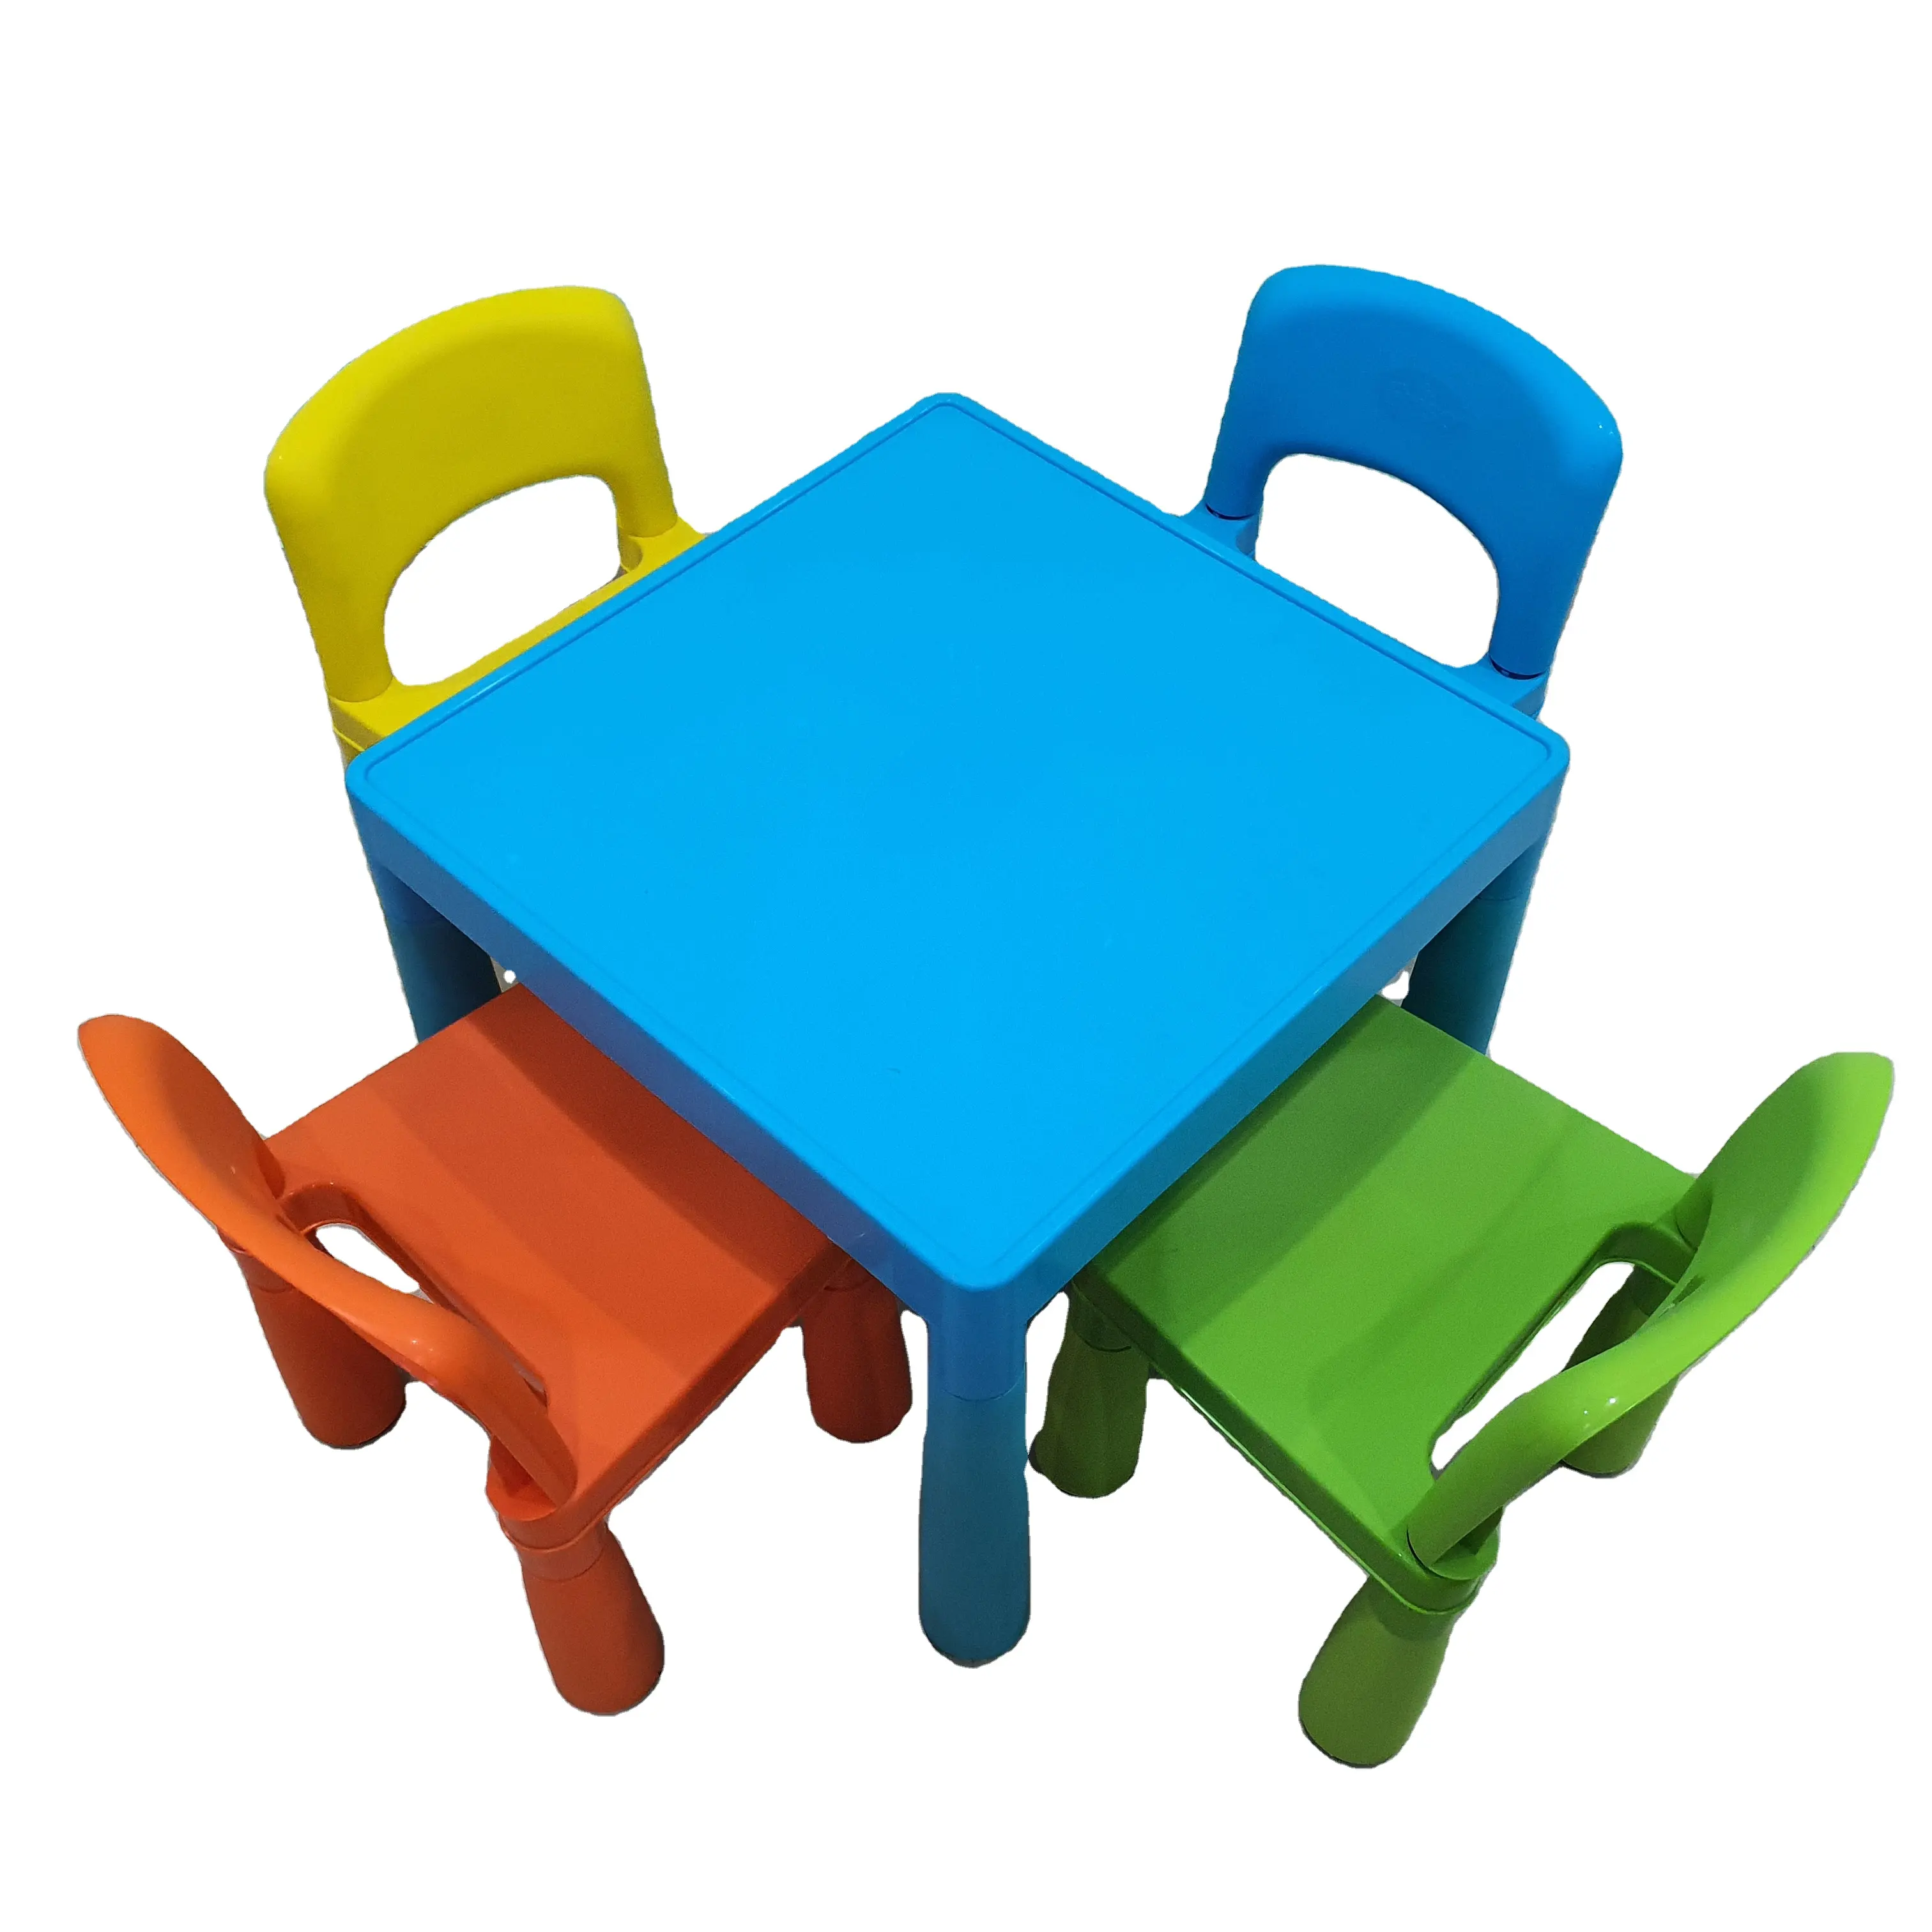 Multicolor Durable Table and Chairs Set for Kids - Best for Toddlers Reading and Dining Home Indoor Kindergarten Furniture